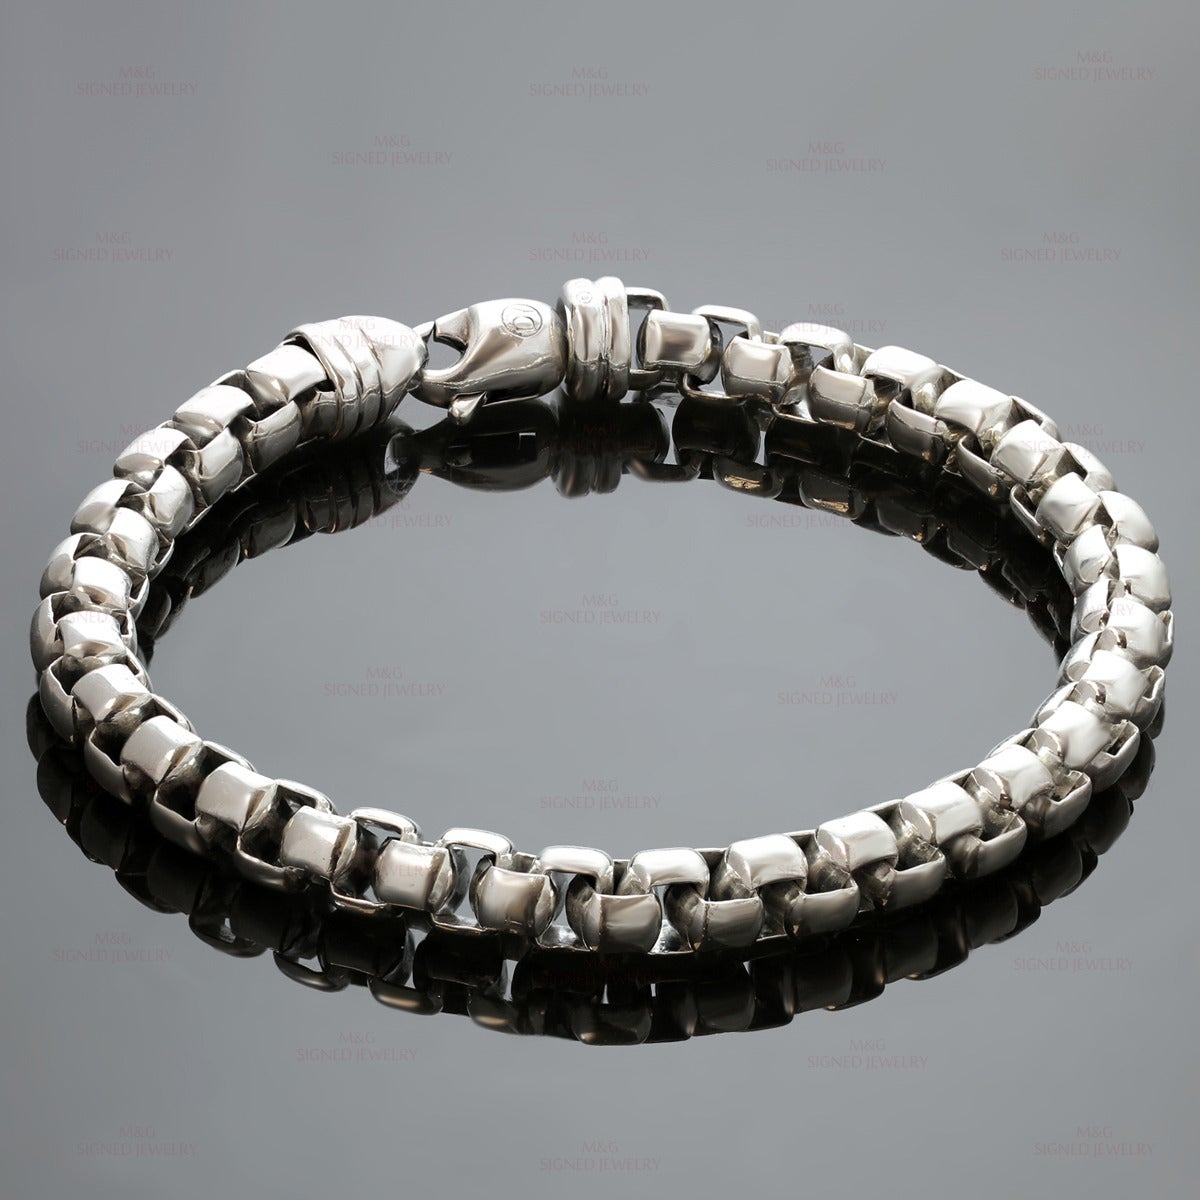 This classic David Yurman unisex bracelet features a box chain link design made in sterling silver and completed with a lobster clasp. Measurements: 0.27